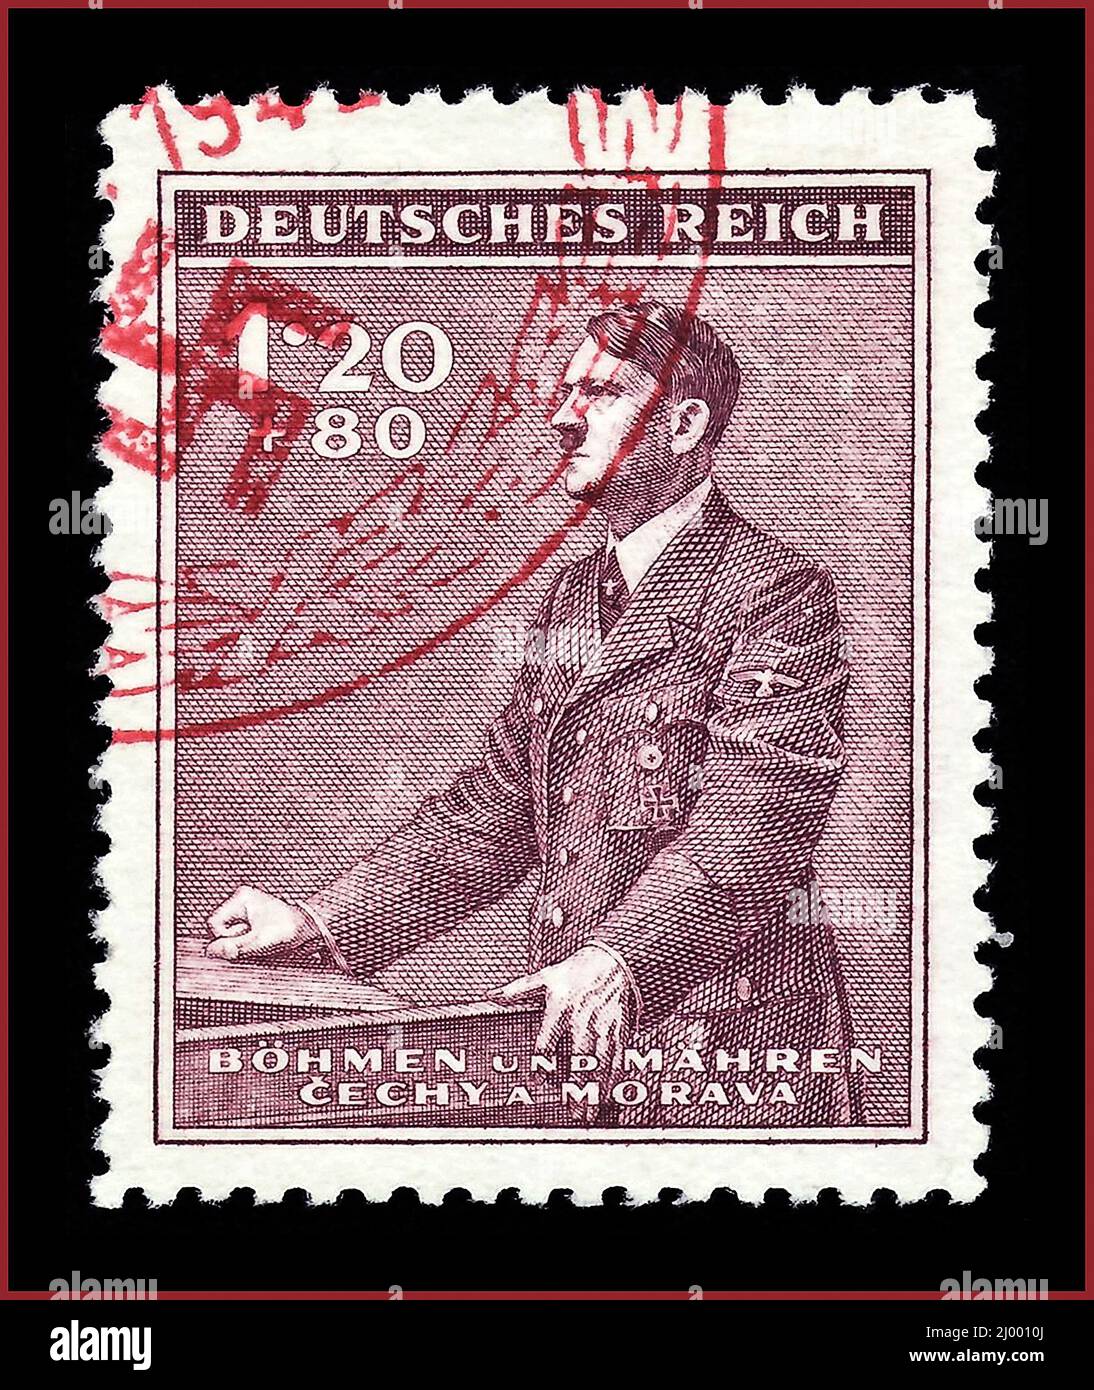 POSTAGE STAMP ADOLF HITLER Semi-postal surcharge stamp of the Nazi-German 'Protektorat Böhmen und Mähren' (Protectorate of Bohemia and Moravia); 1942; semi-postal stamp of the issue to the '53th anniversary of birth of the 'Führer'' Adolf Hitler; stamp motive shows Hitler at a lactern; The Nazi-protectorate 'Bohemia and Moravia' existed 1939-1945 from 15 March 1939 until to 8 May 1945 as part of homeland of the German Empire. Stock Photo